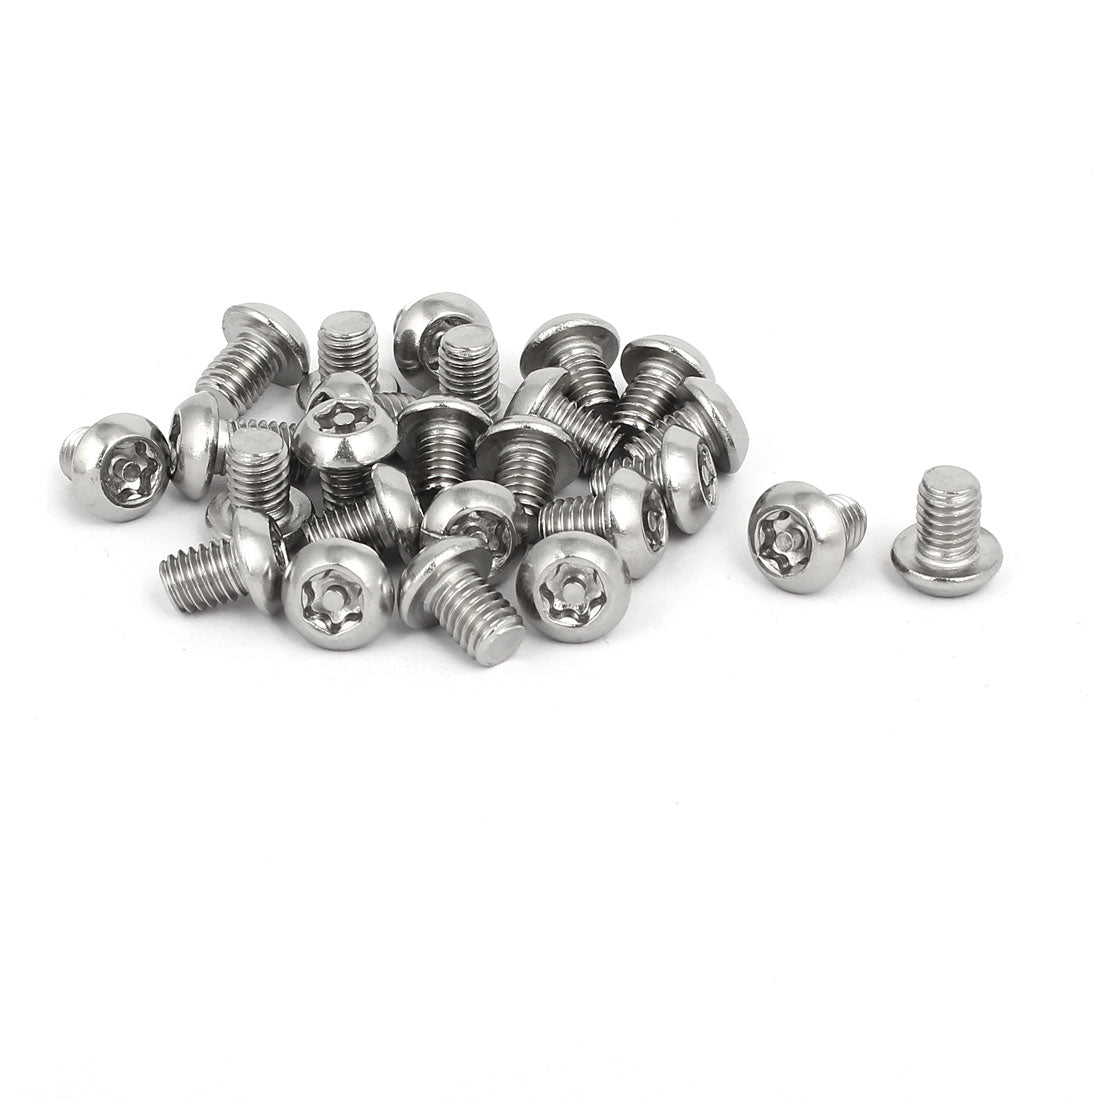 uxcell Uxcell M6 x 8mm 304 Stainless Steel Torx Security Pan Head Machine Screws 25PCS